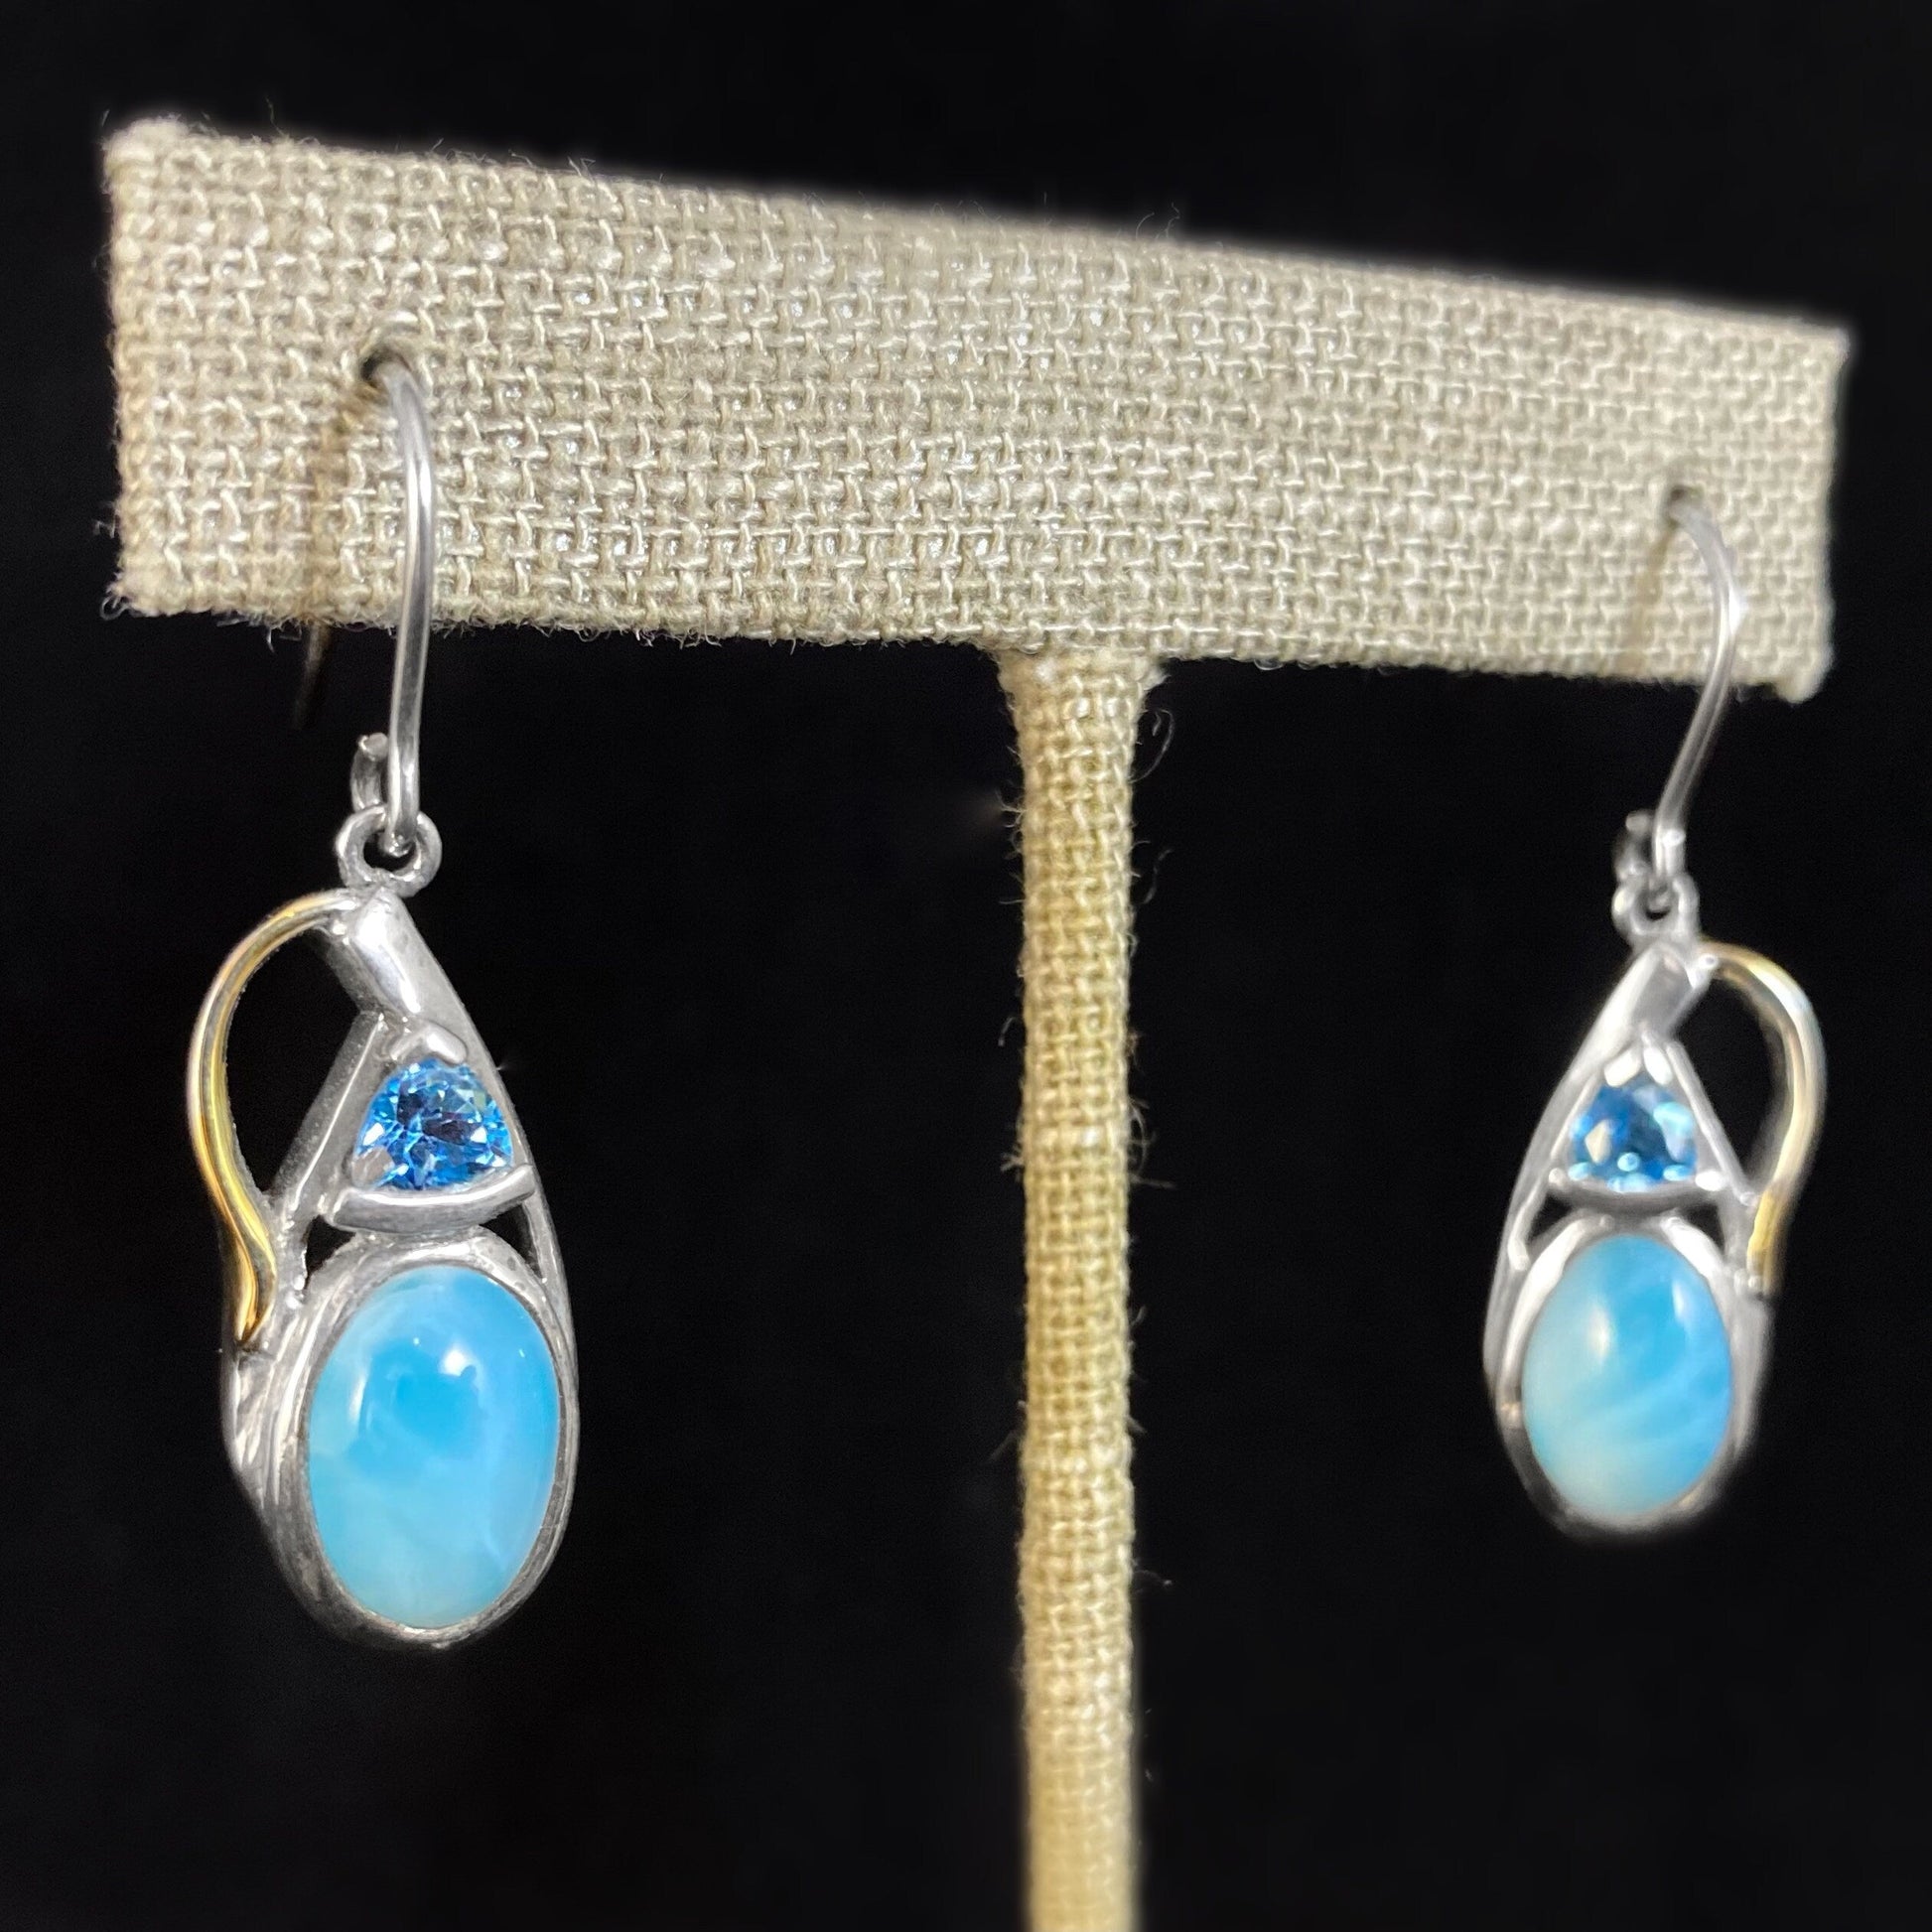 Marahlago Larimar and Sterling Silver Lena Earrings